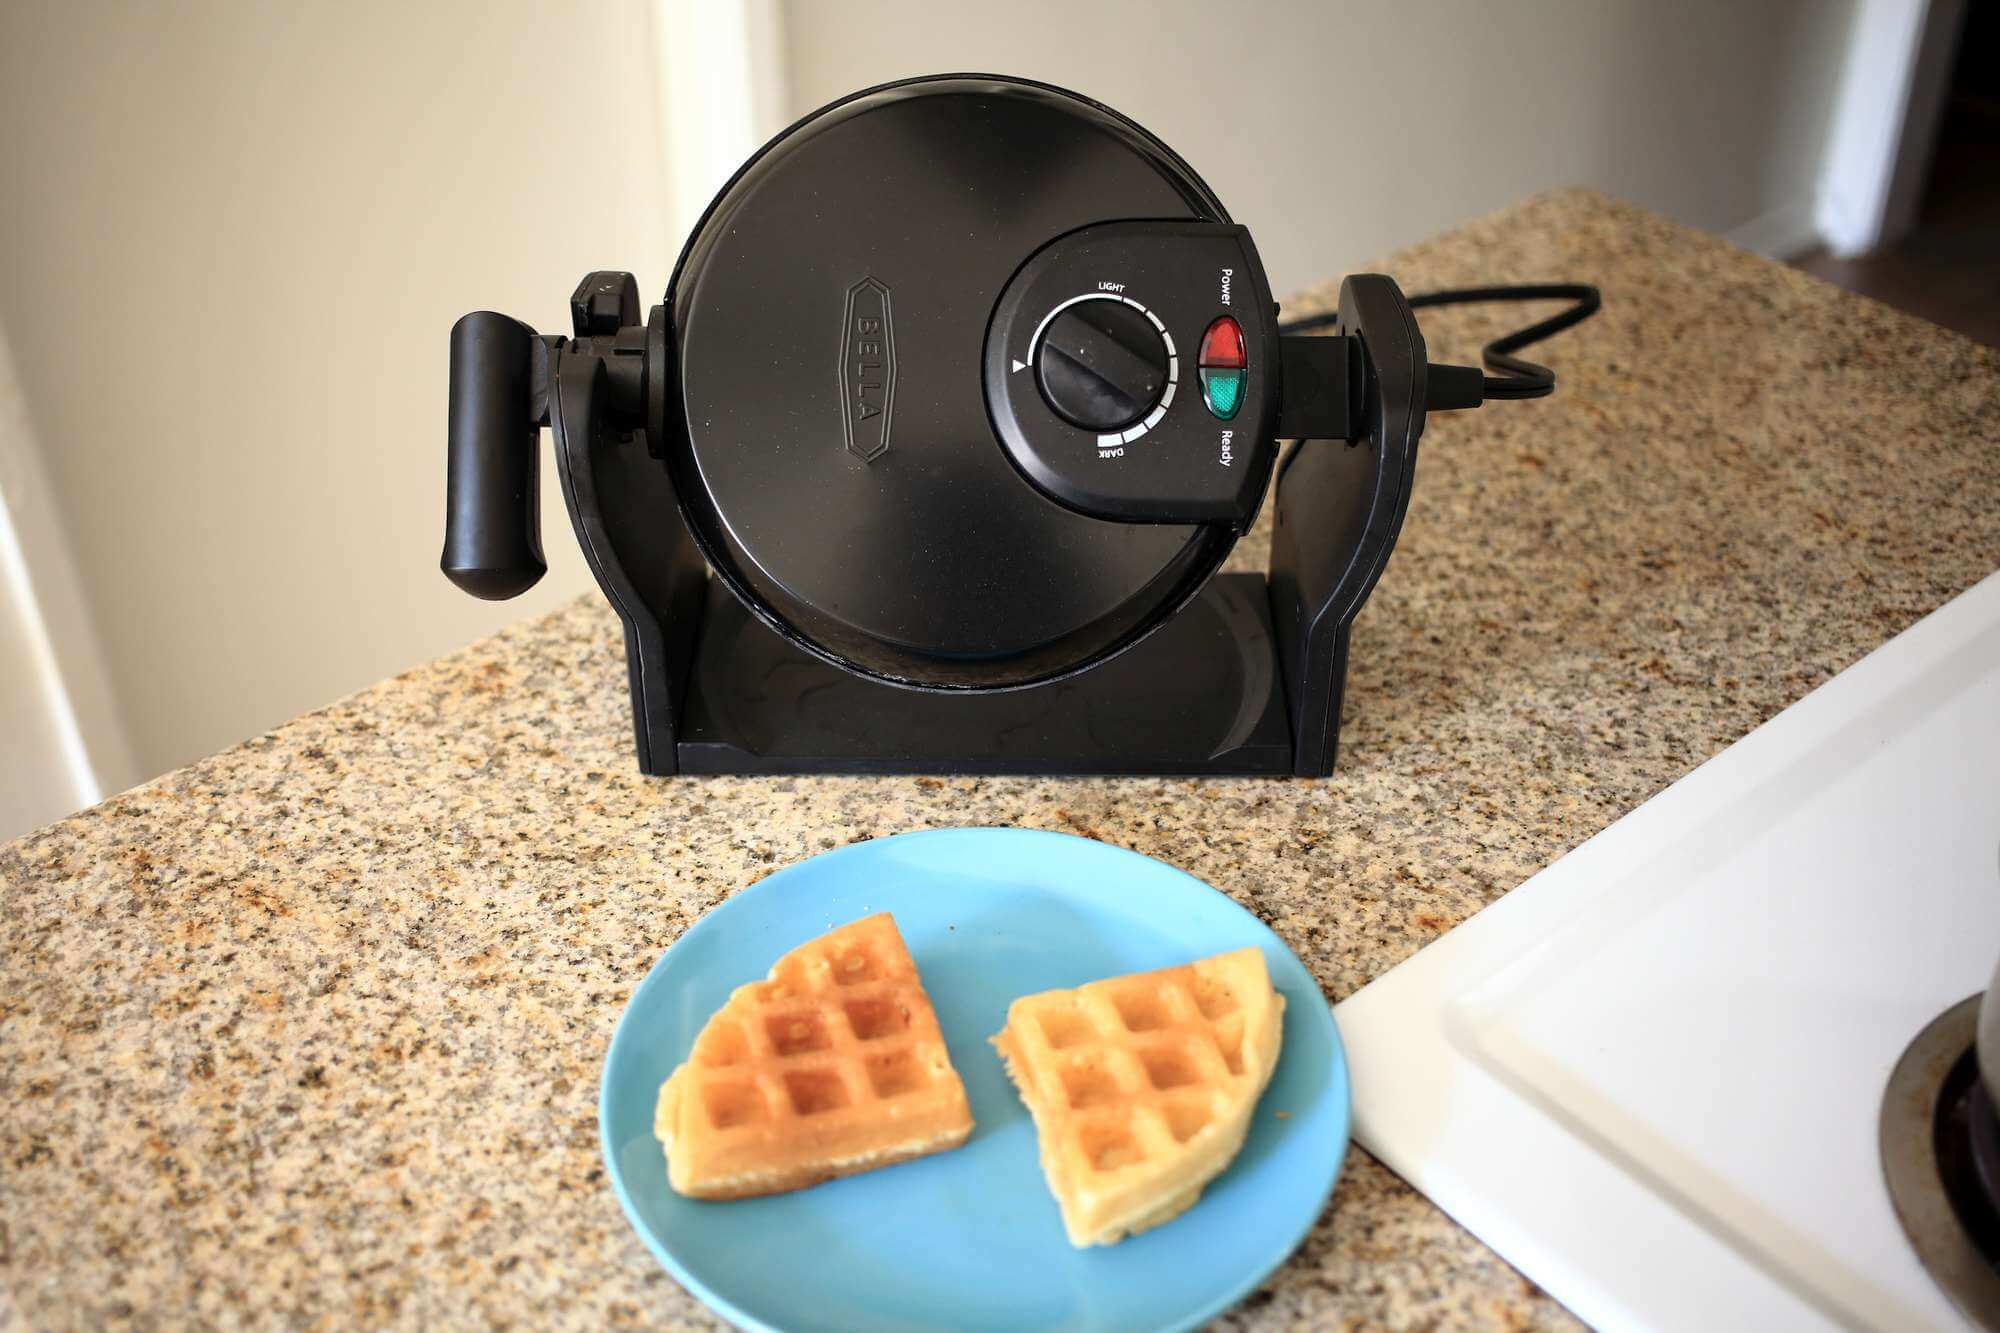  Oster Belgian Waffle Maker with Adjustable Temperature Control,  Non-Stick Plates and Cool Touch Handle, Makes 8 Waffles, Stainless Steel:  Electric Waffle Irons: Home & Kitchen